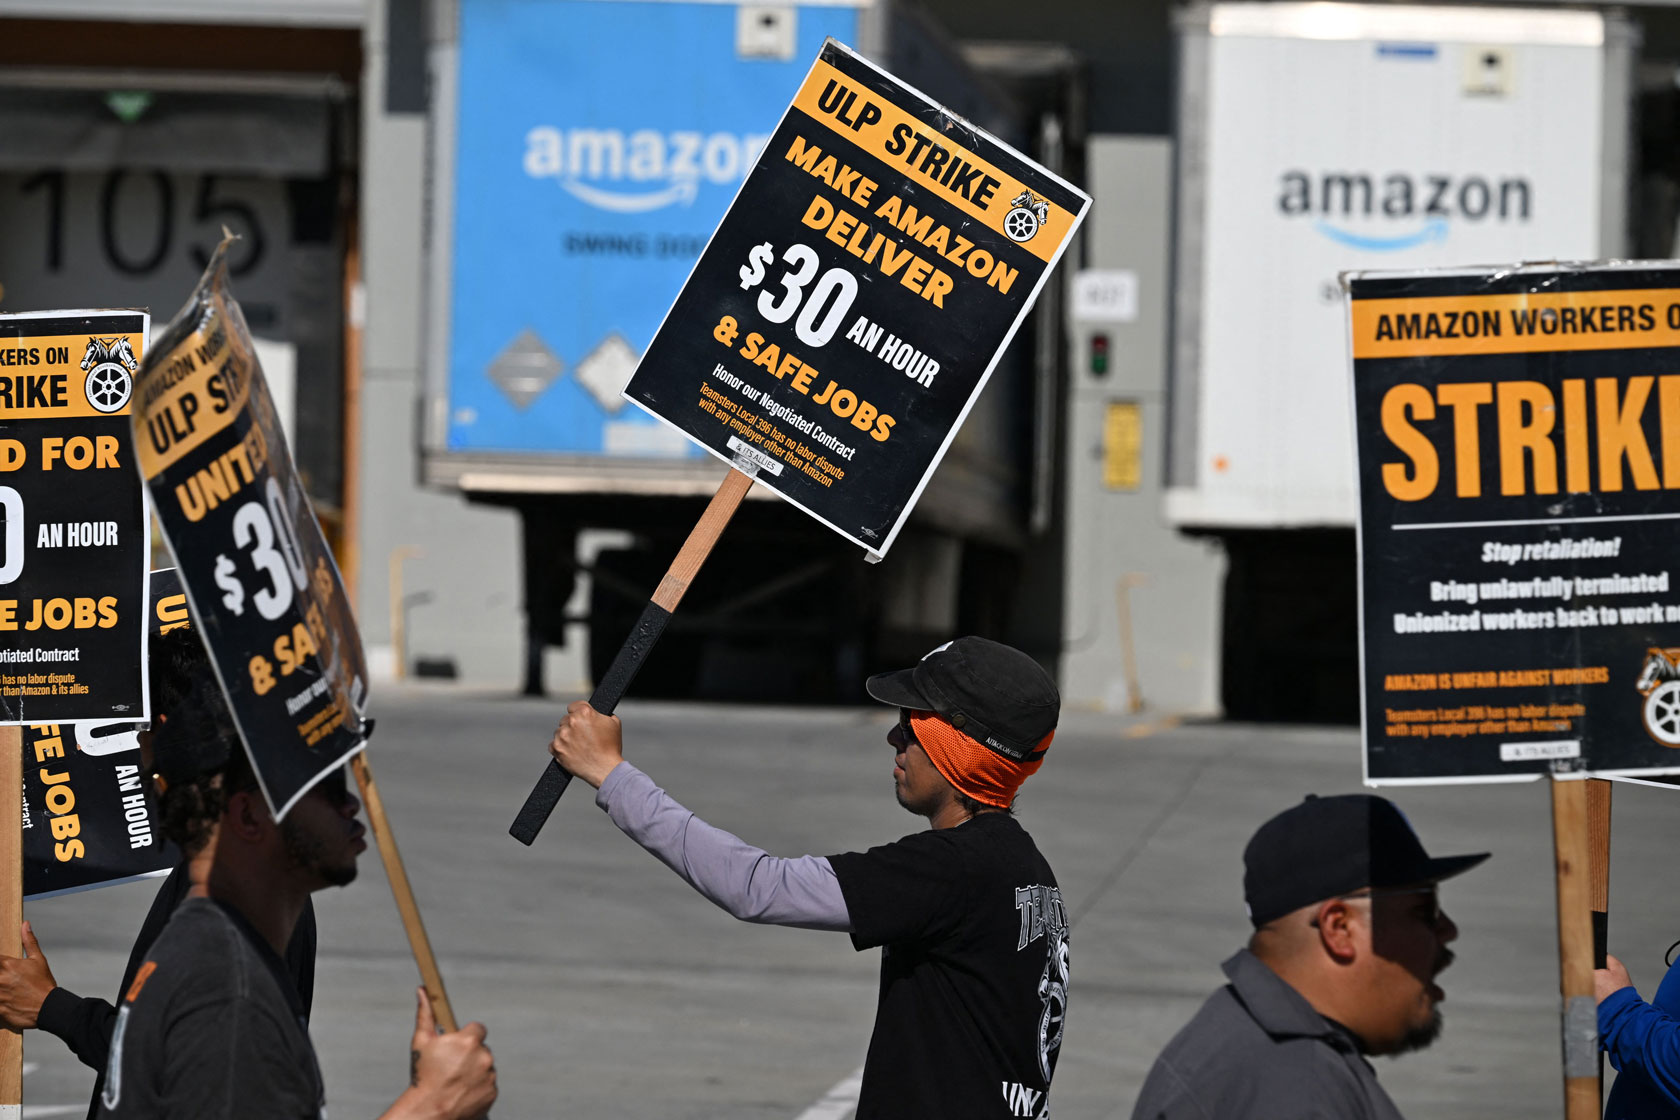 A line of workers holding picket signs marches outside an Amazon warehouse with two delivery trucks parked at it.